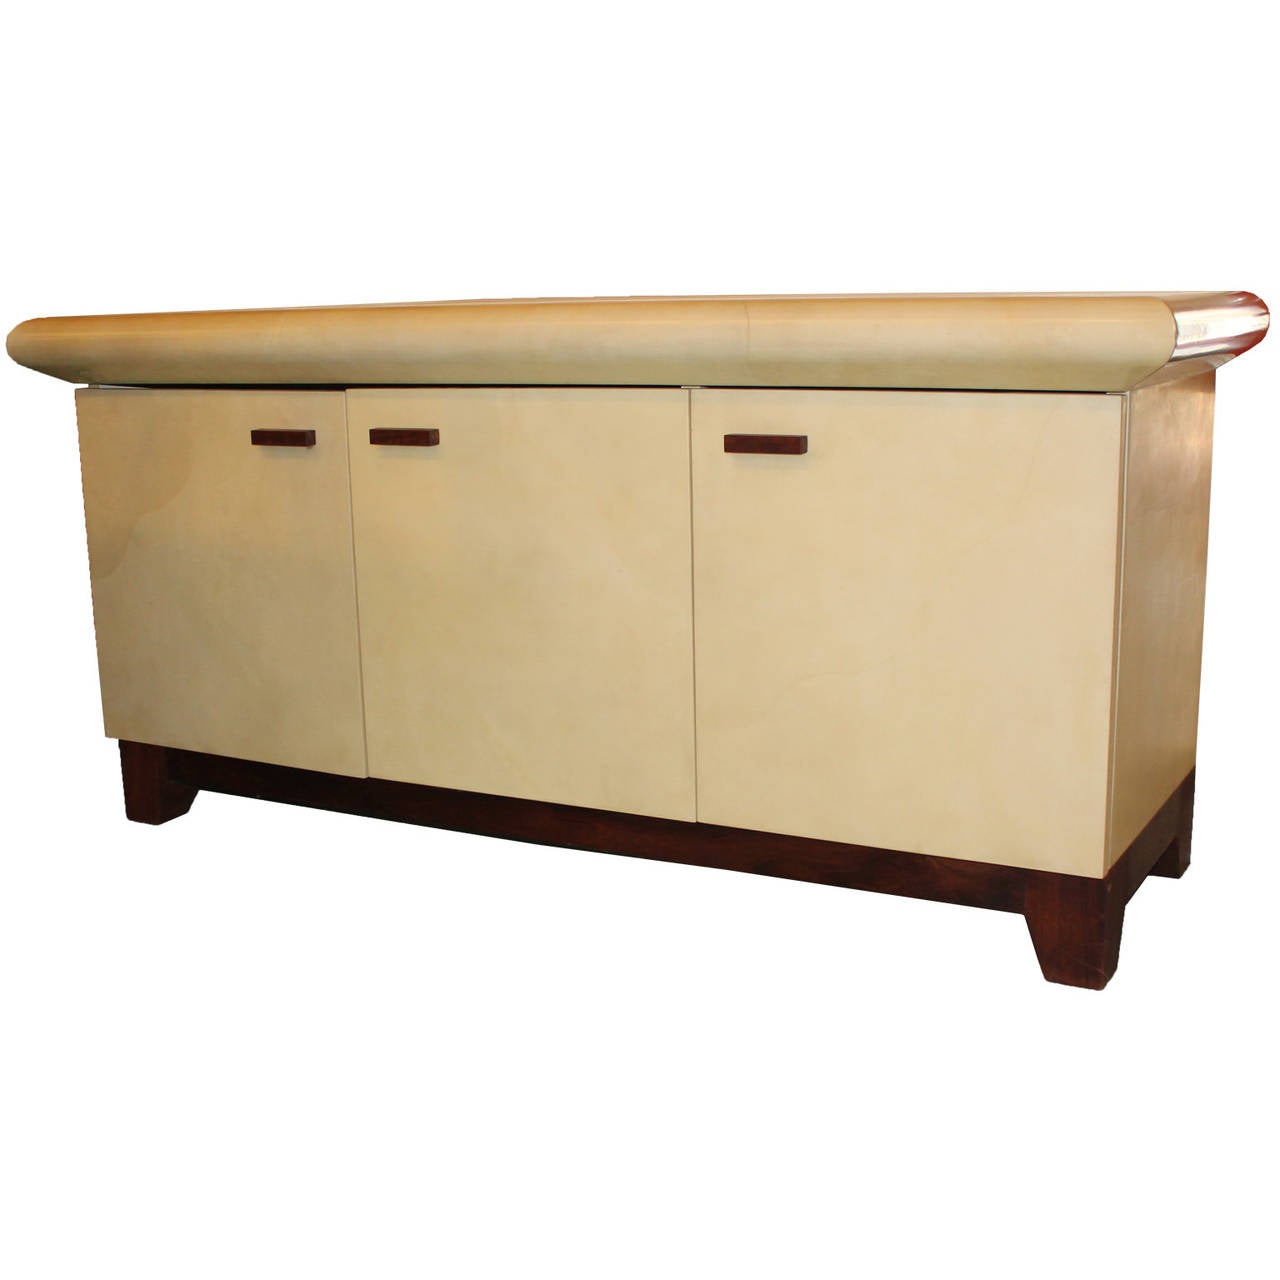 Fabulous sideboard covered in lacquered goat skin. Finish feels incredibly smooth. A walnut wood base and handles give this piece a nice touch. Three doors open to reveal adjustable shelves with ample storage.